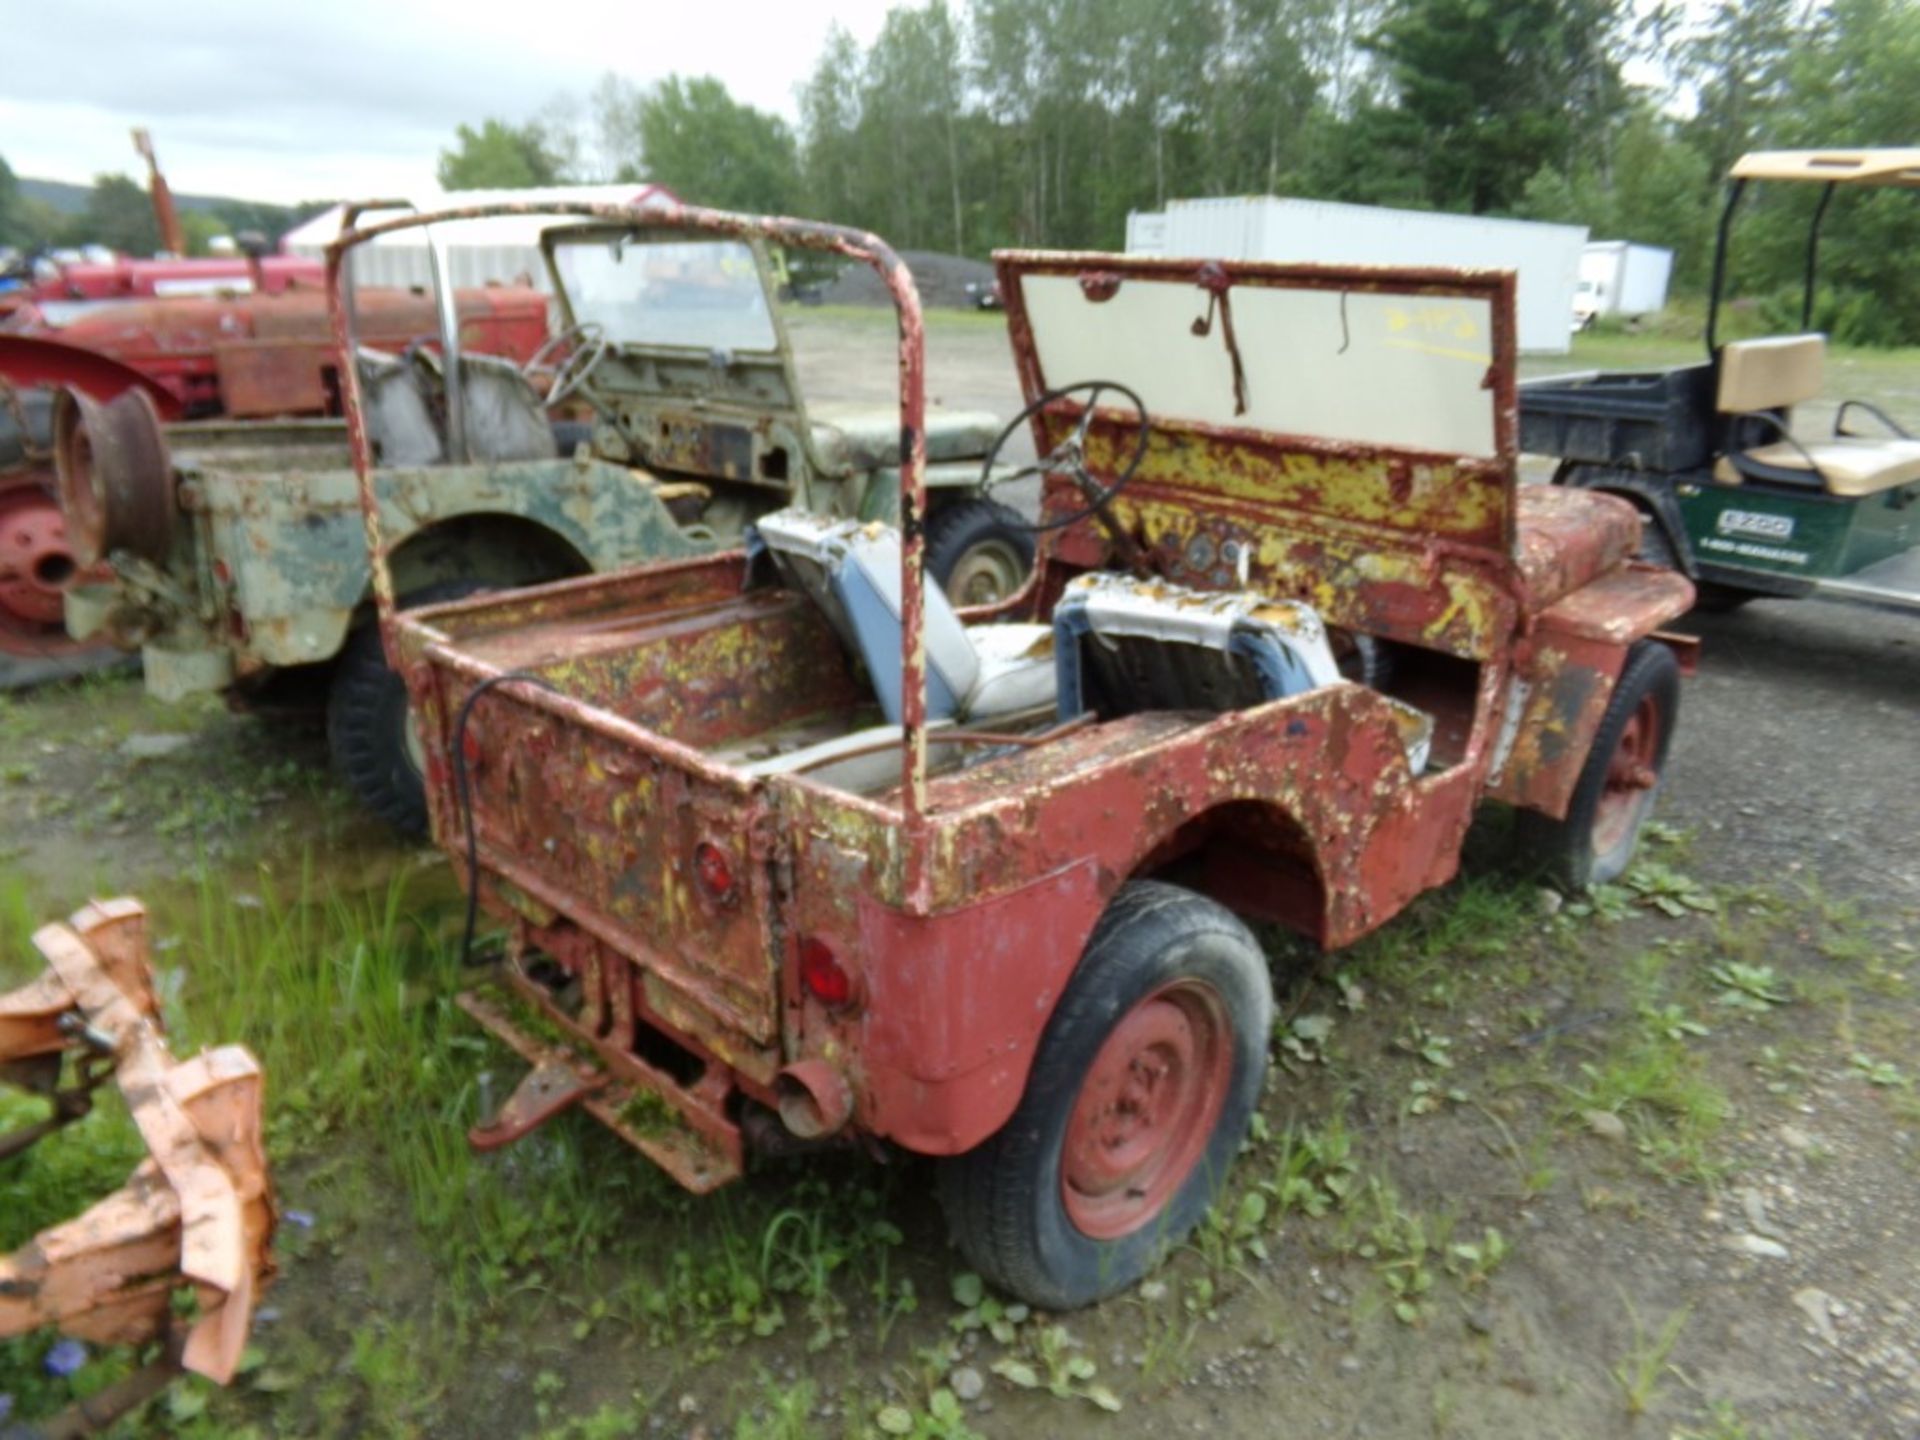 1946 Willy's Jeep, Red, w/Windshield, Vin #: 52610 -HAVE TRANS. REG. / OPEN TO ALL BUYERS - Needs - Image 2 of 3